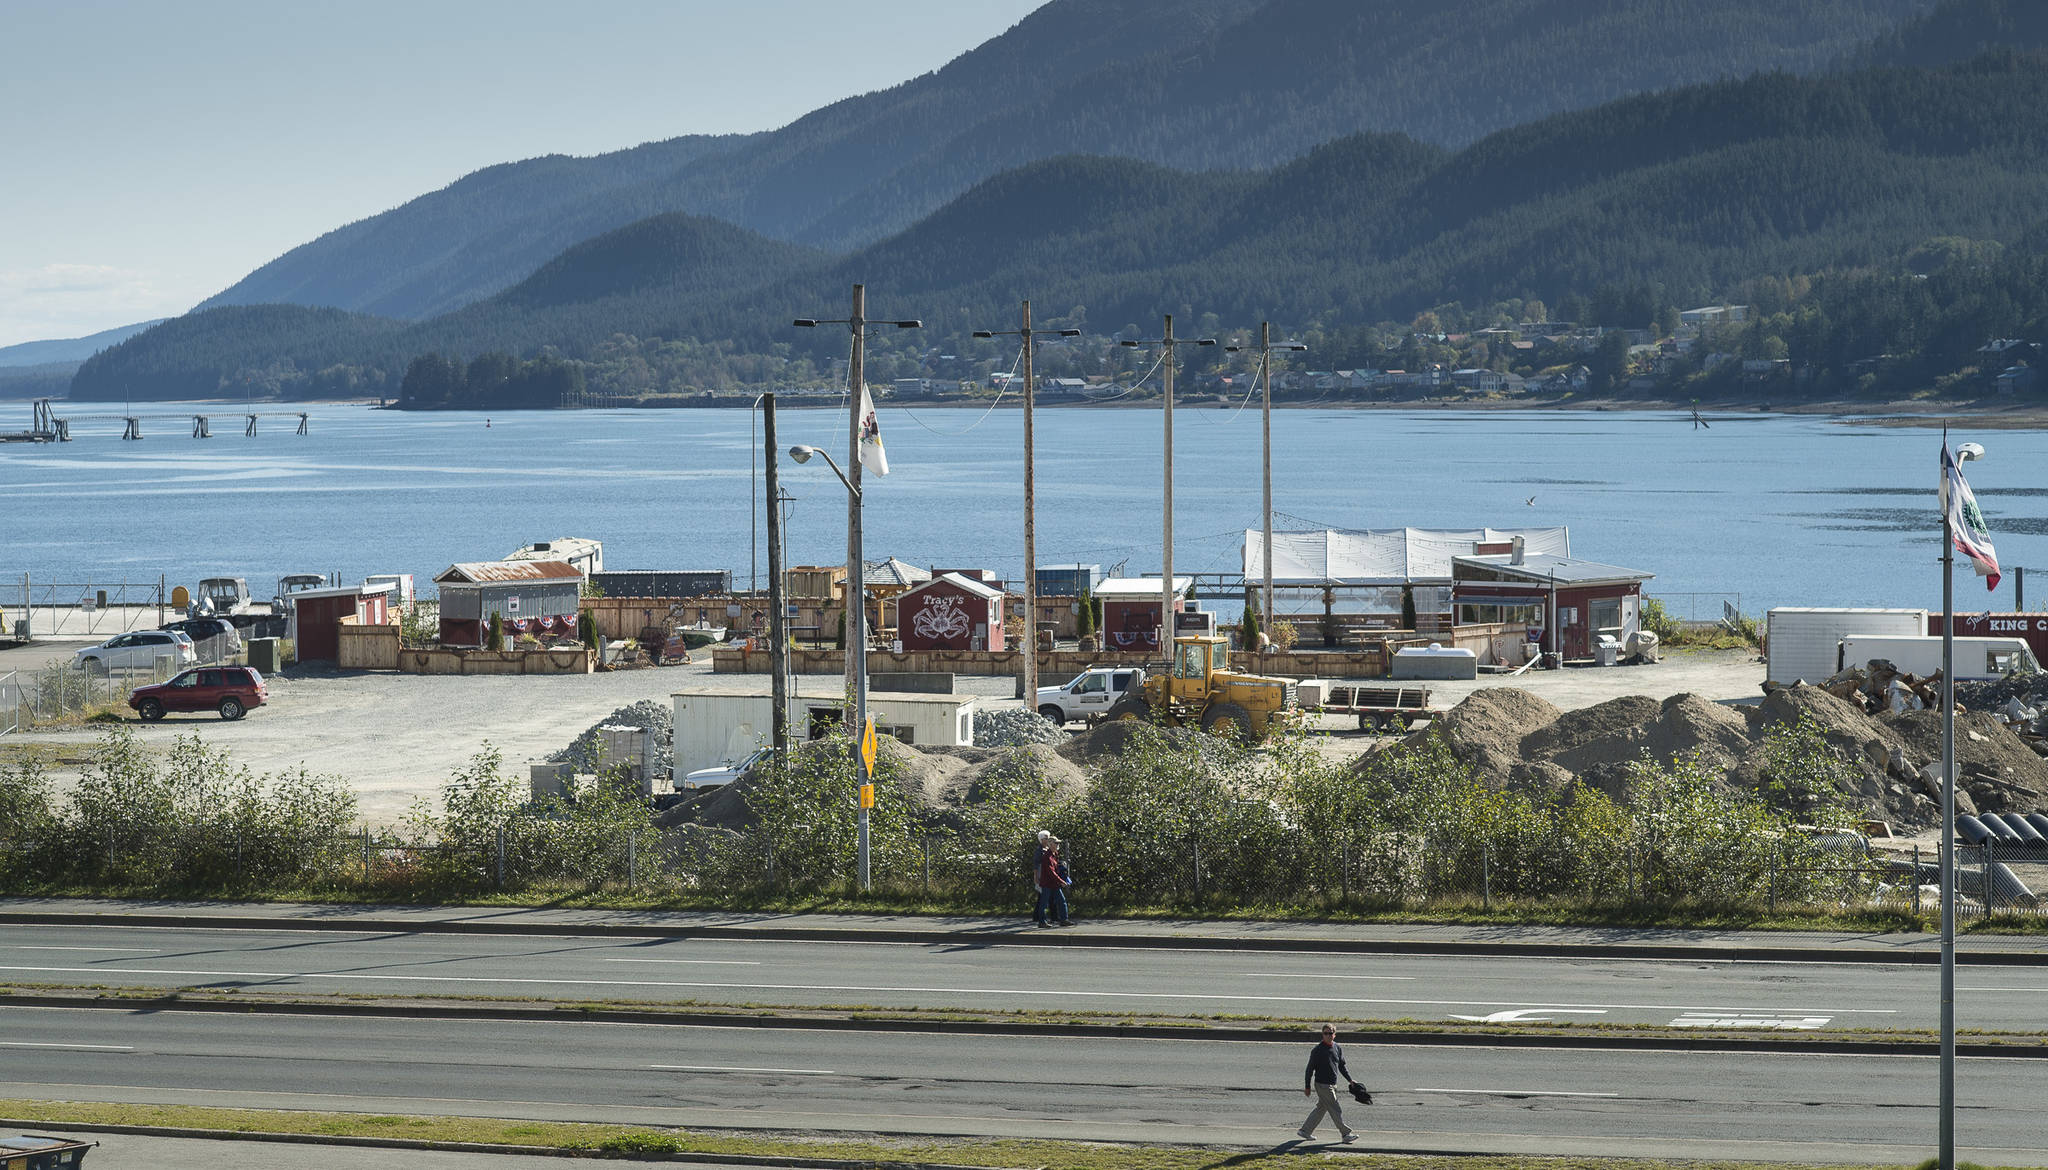 Alaska Mental Health Trust Authority is looking at all options in the sale of the subport land along Juneau downtown waterfront on Monday, Sept. 17, 2018. (Michael Penn | Juneau Empire)